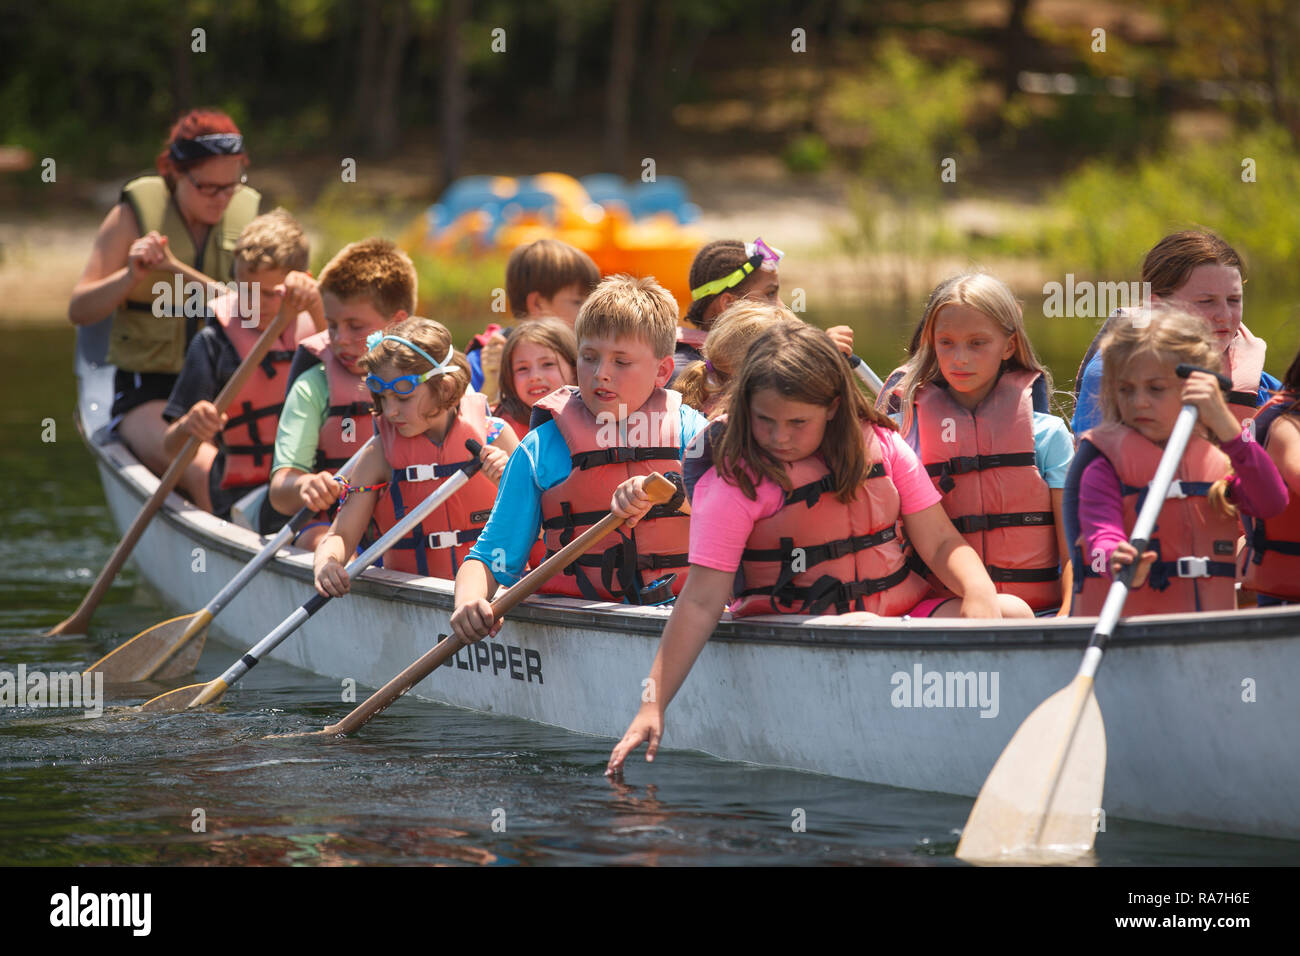 Many young children wearing life preservers fill a large canoe that paddles in a lake during their summer camp. Stock Photo